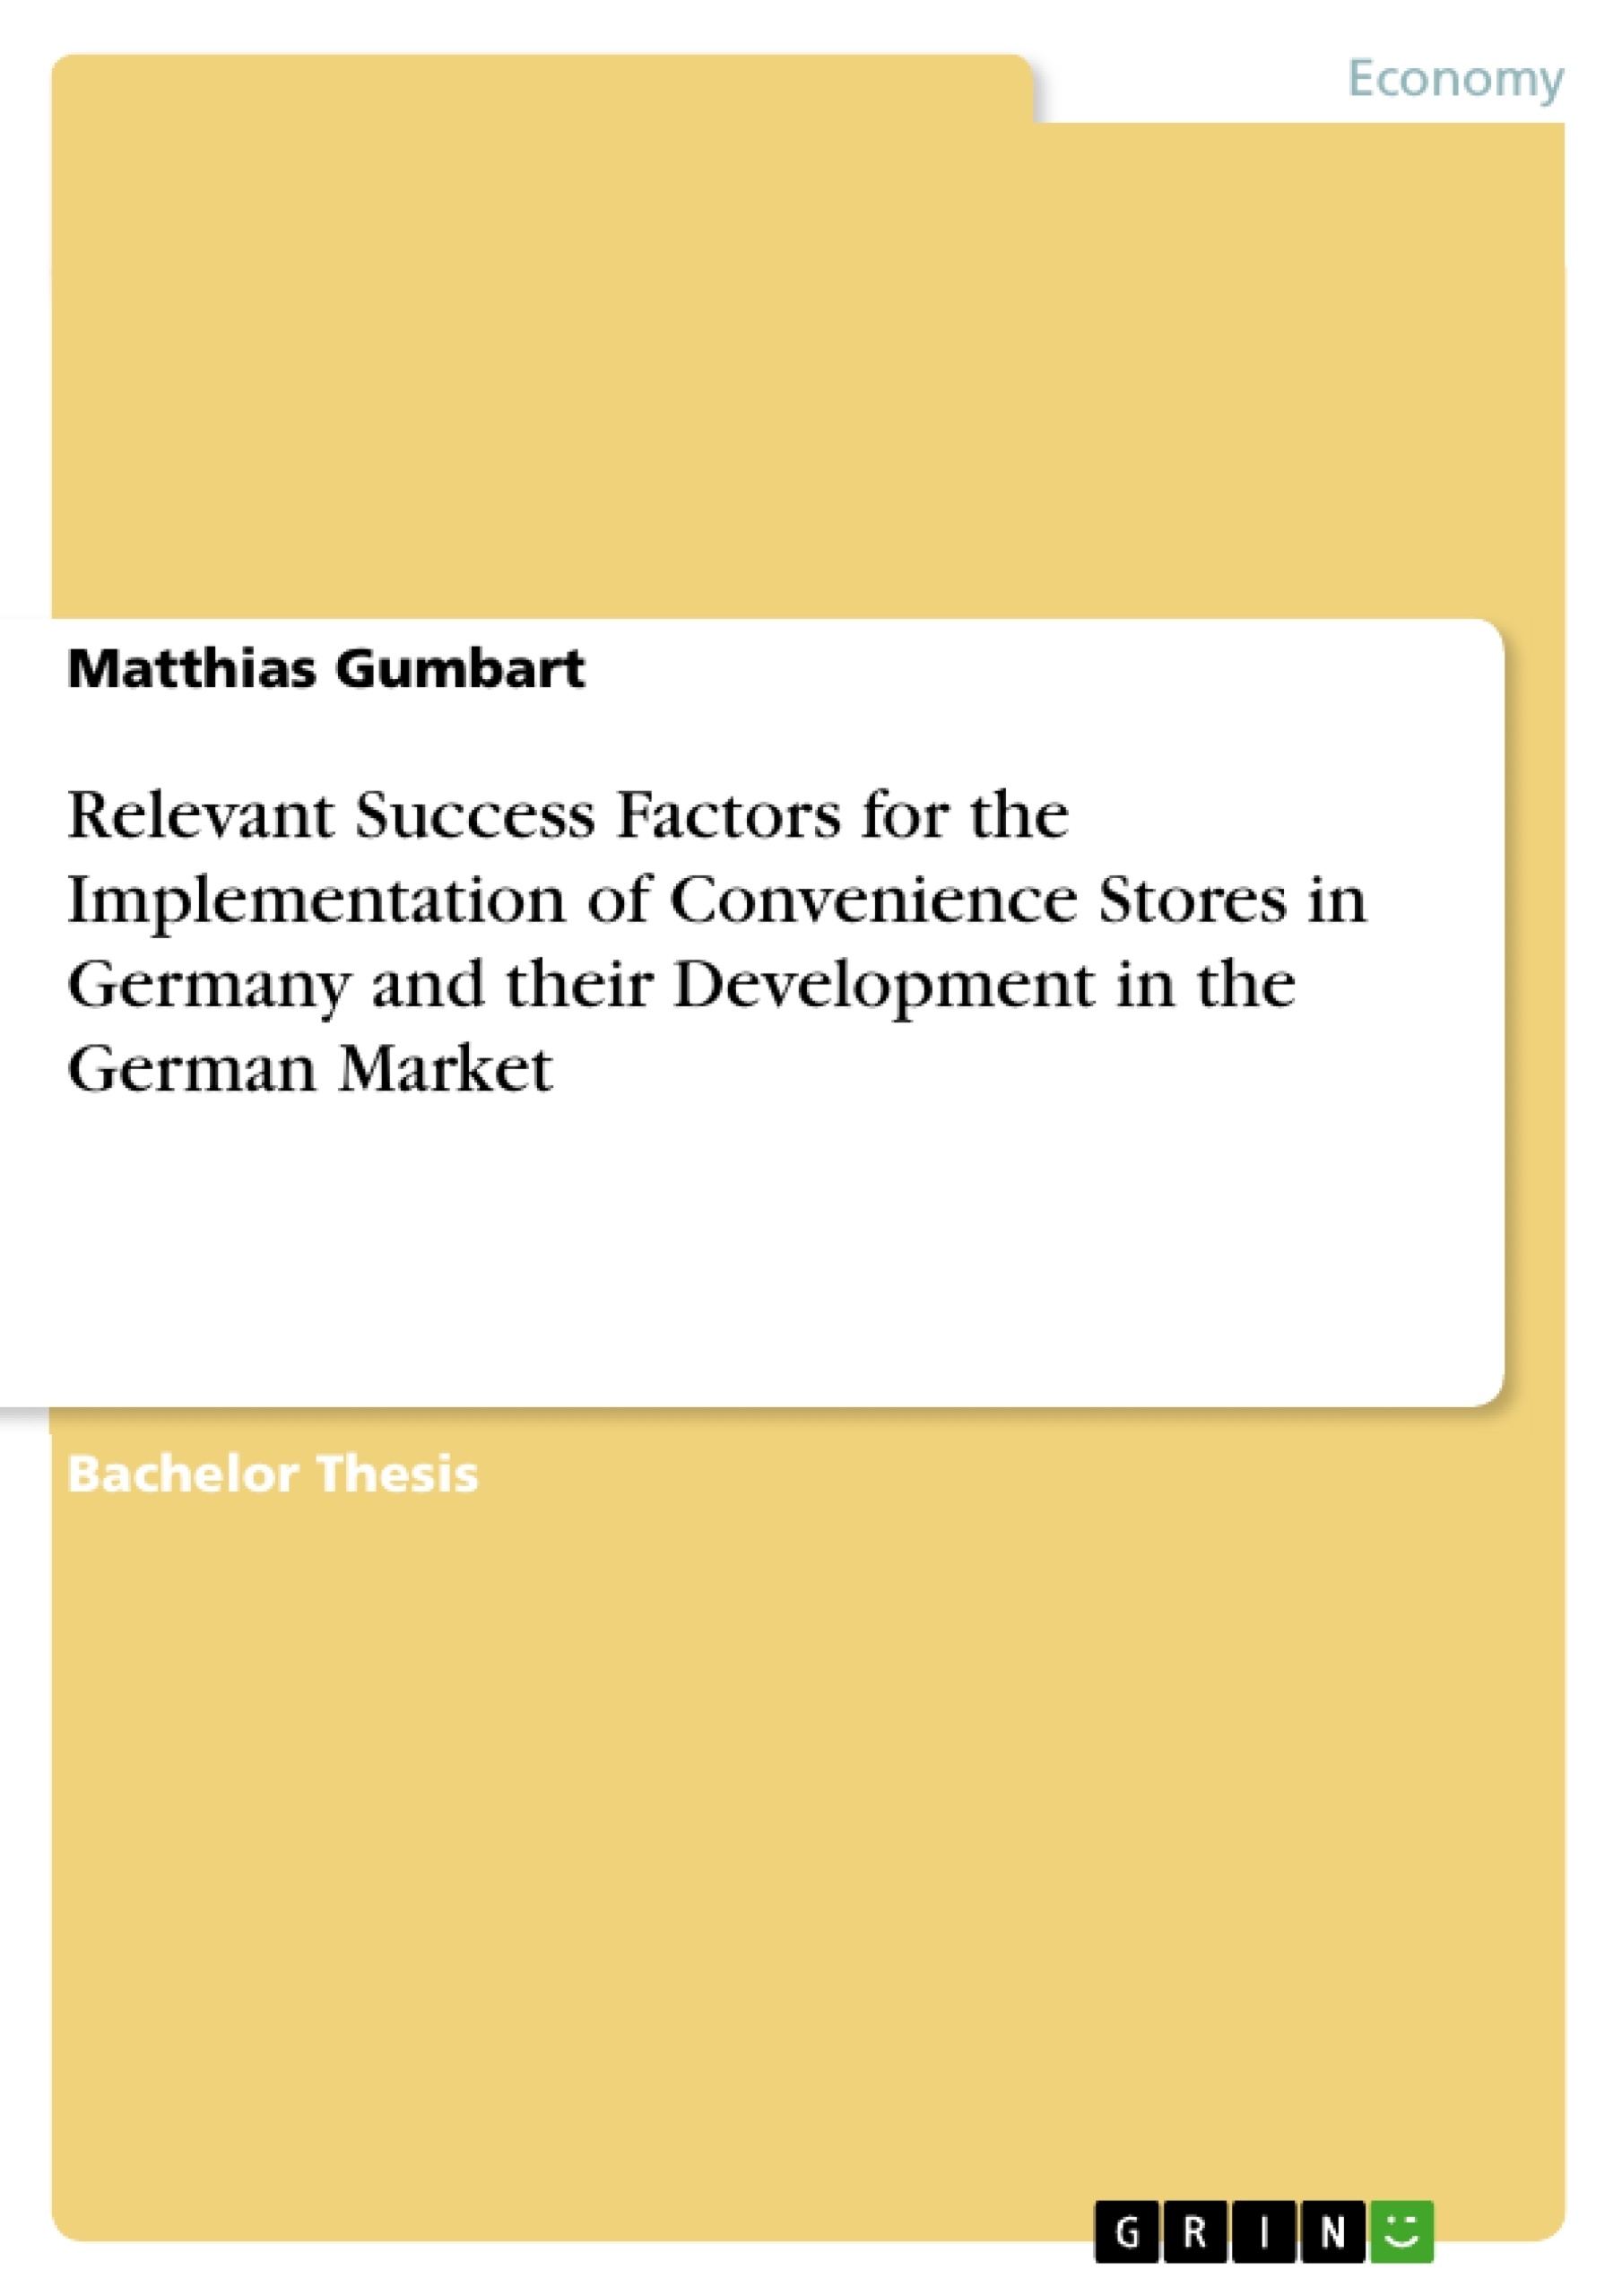 GRIN - Relevant Success Factors for the Implementation of Convenience  Stores in Germany and their Development in the German Market